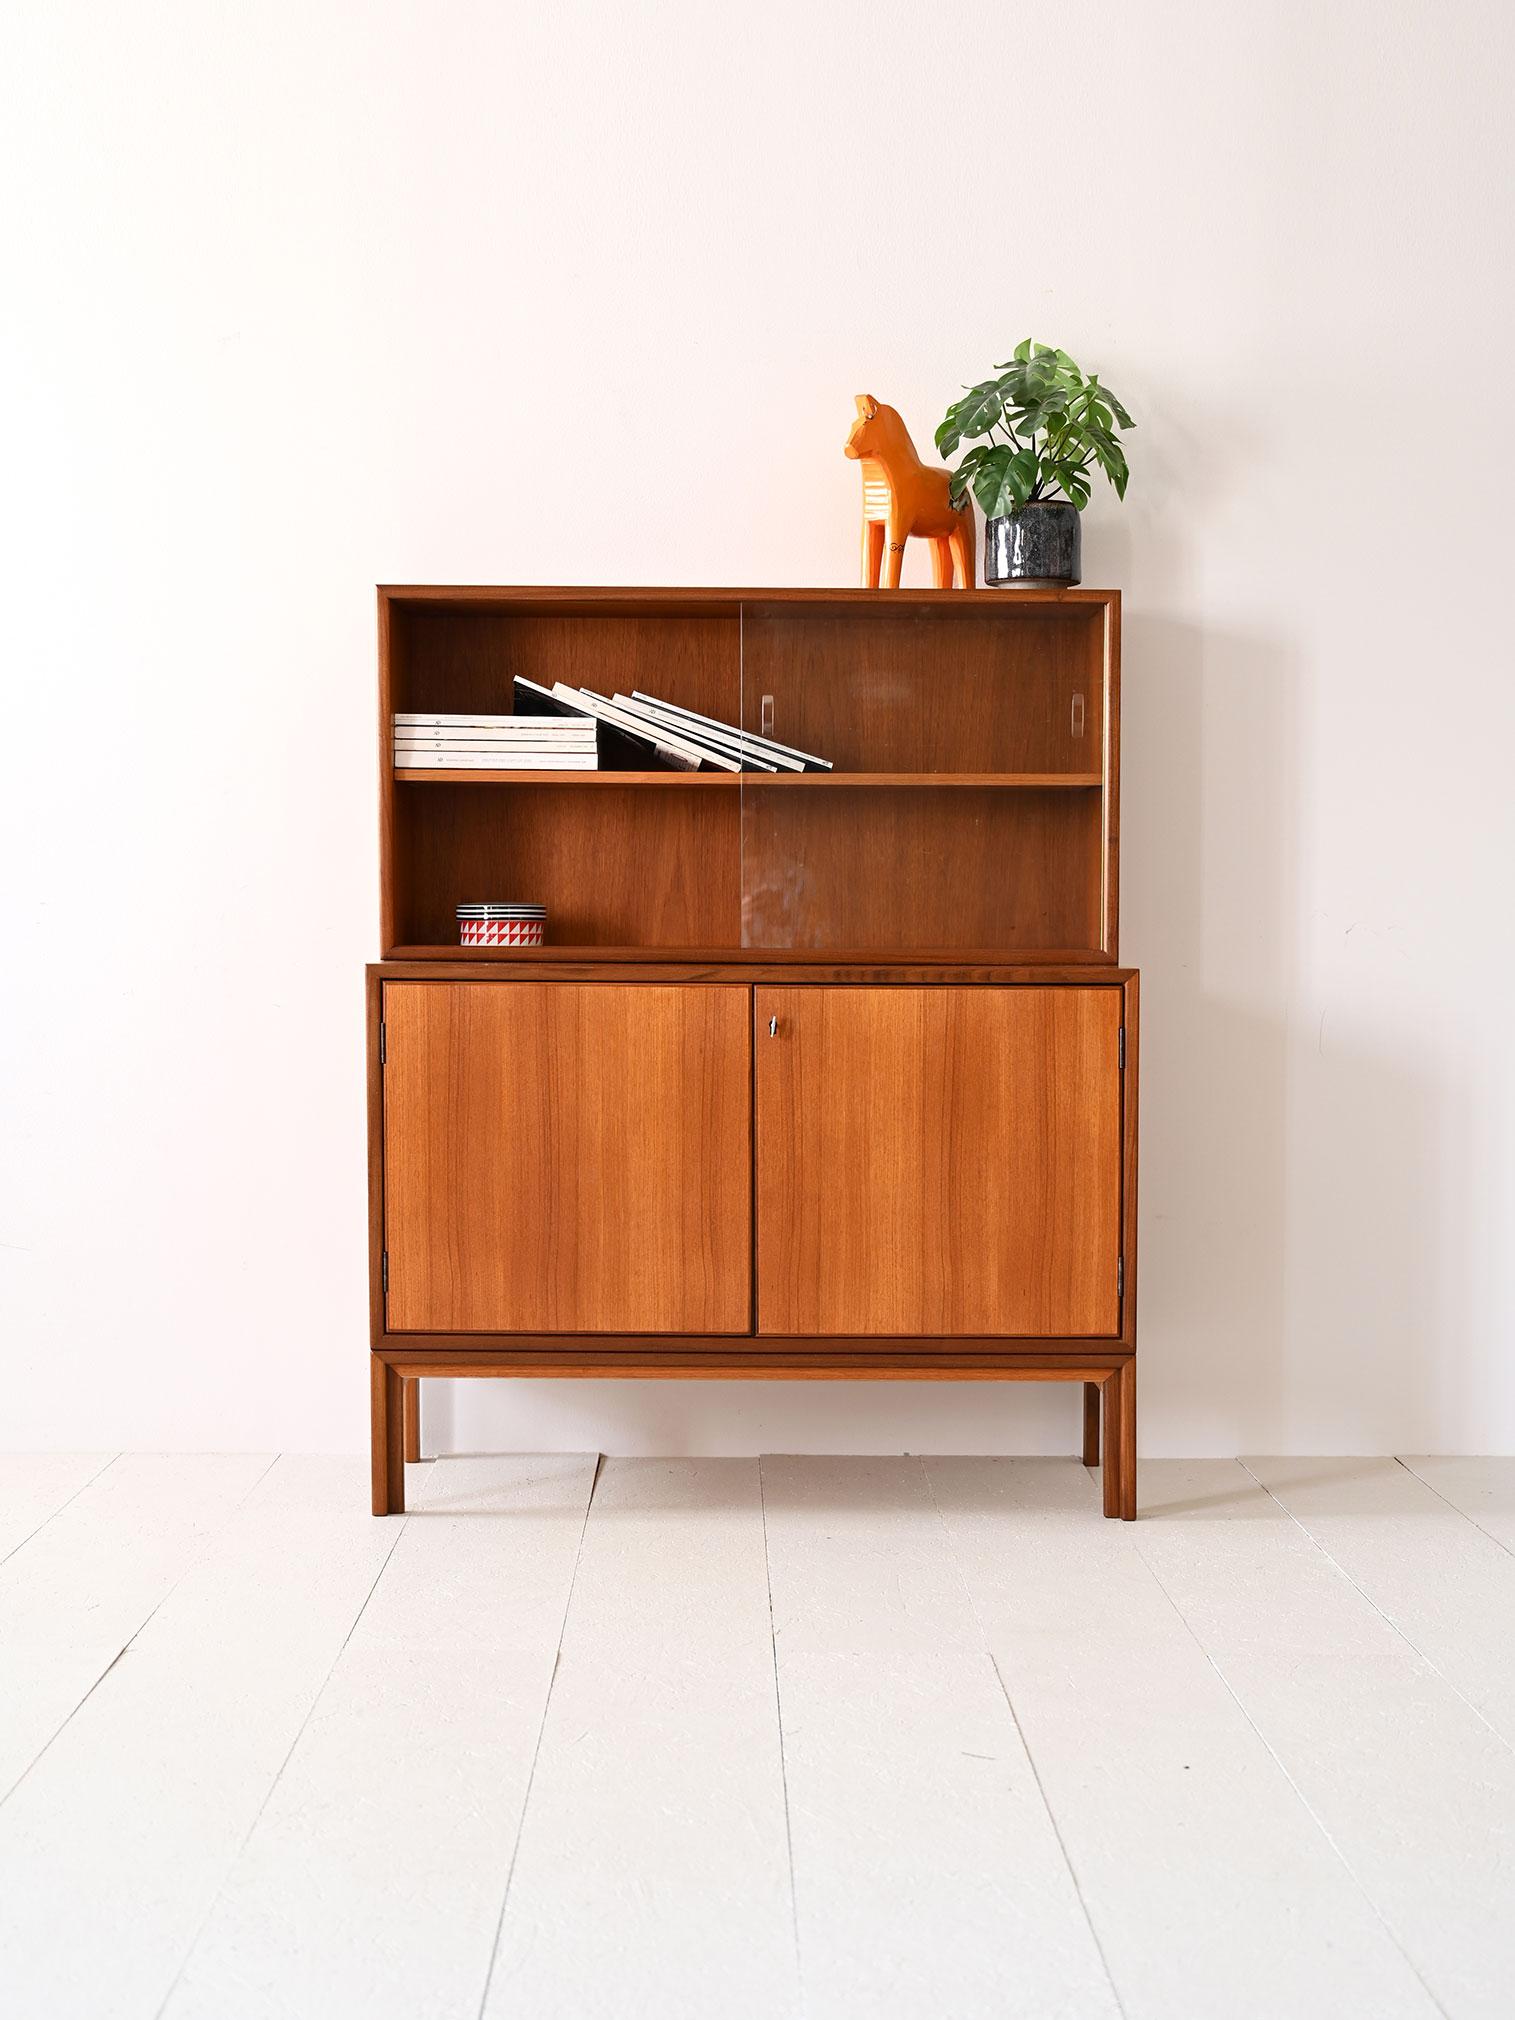 Small 1960s sideboard made of teak and glass.

A piece of furniture with an original shape that, thanks to its small size, can be placed in a kitchen or hall with a small space.
Consists of a low cabinet with hinged doors equipped with a lock on